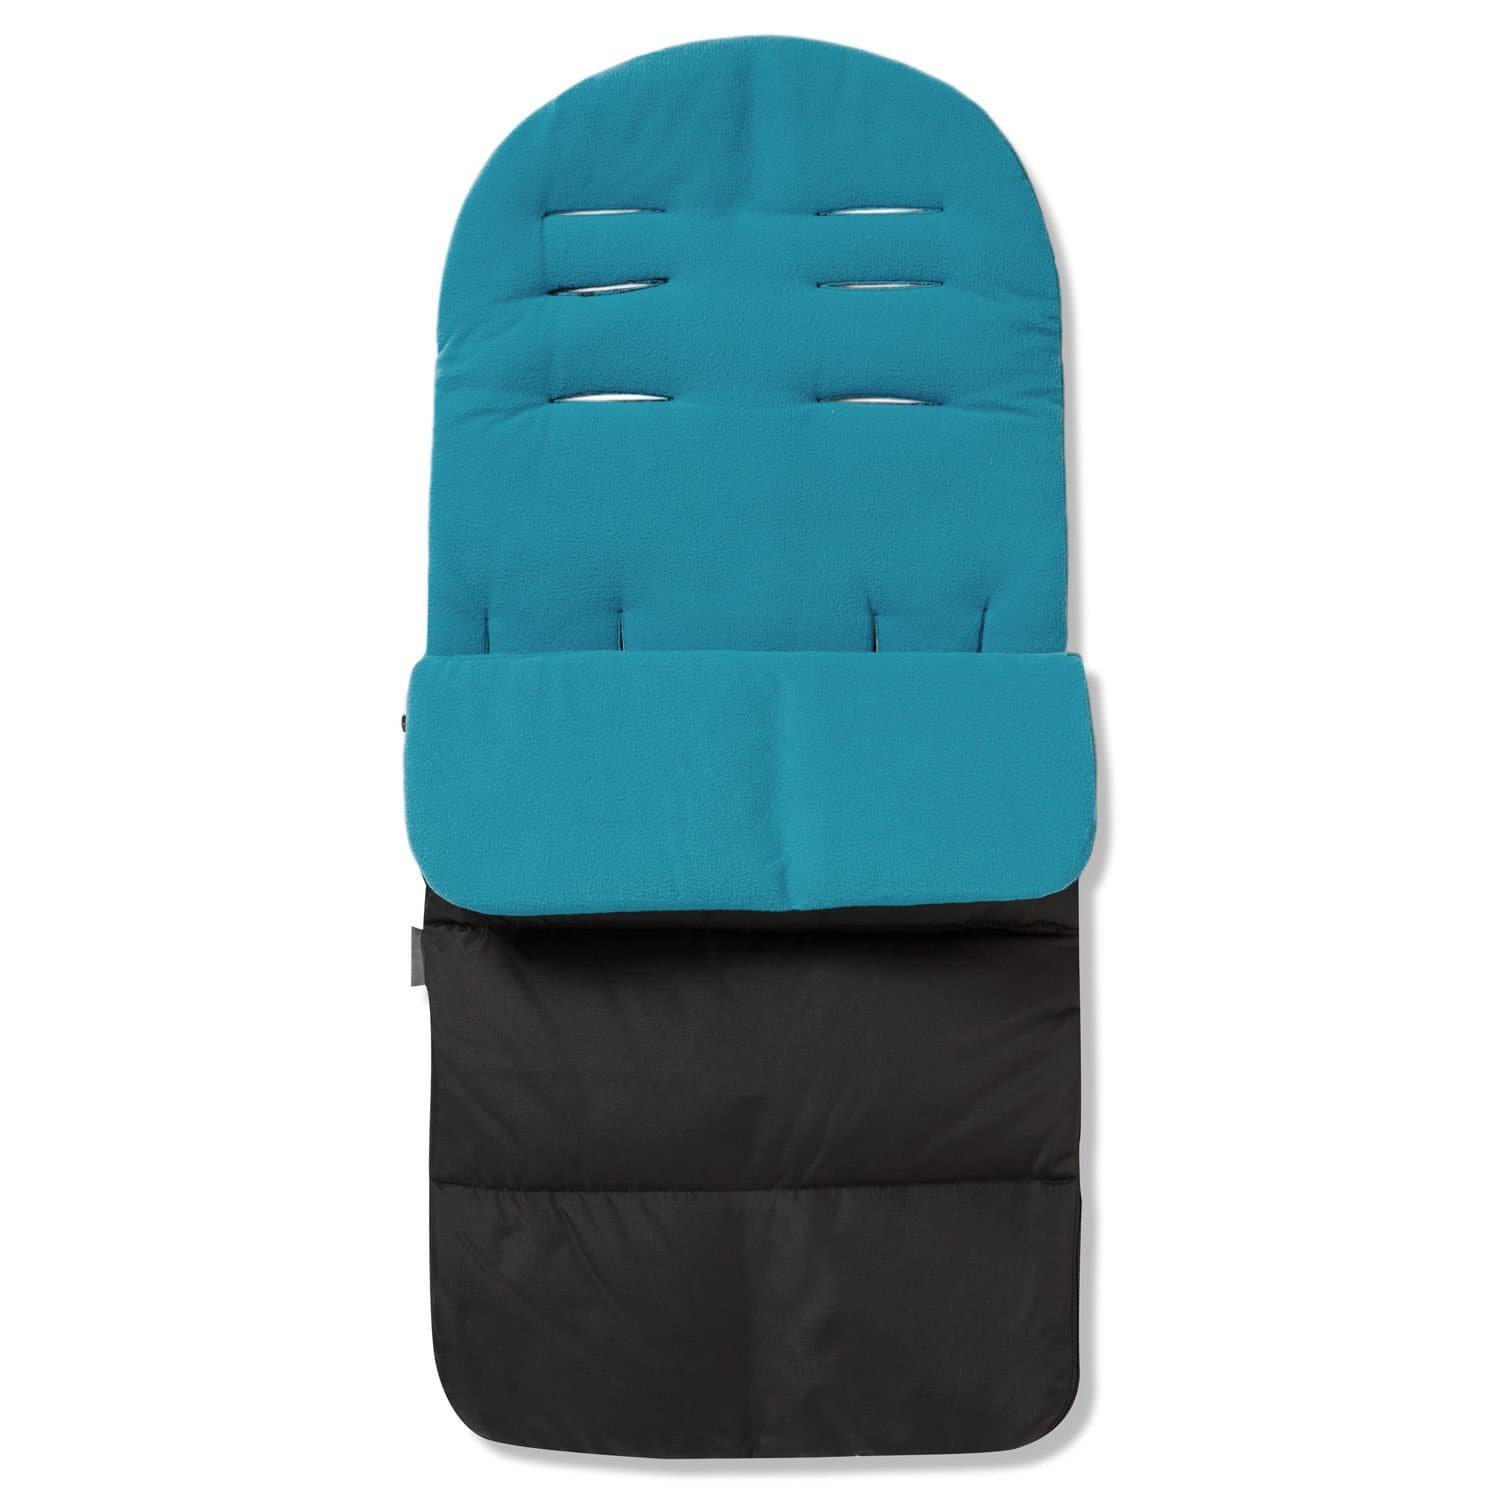 Premium Footmuff / Cosy Toes Compatible with Zooper - Ocean Blue / Fits All Models | For Your Little One